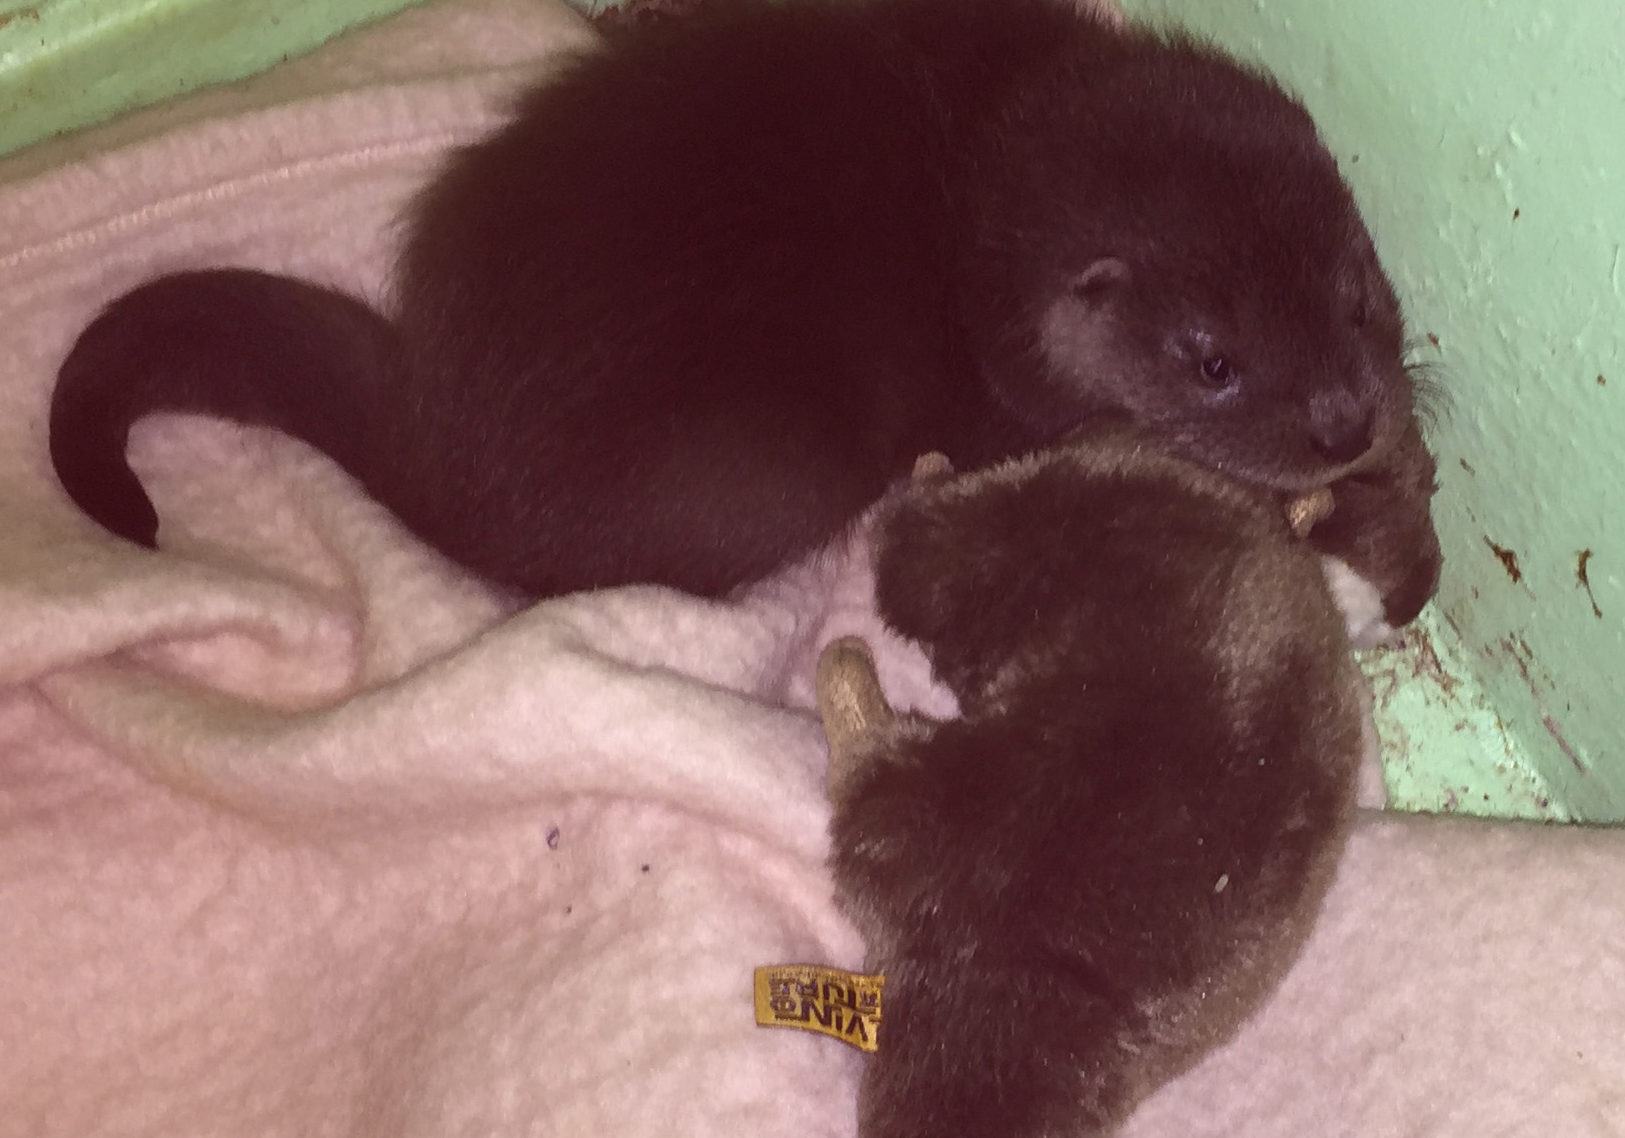 The otter cub was discovered by Paul and Grace Yoxon of the International Otter Survival Fund (IOSF)